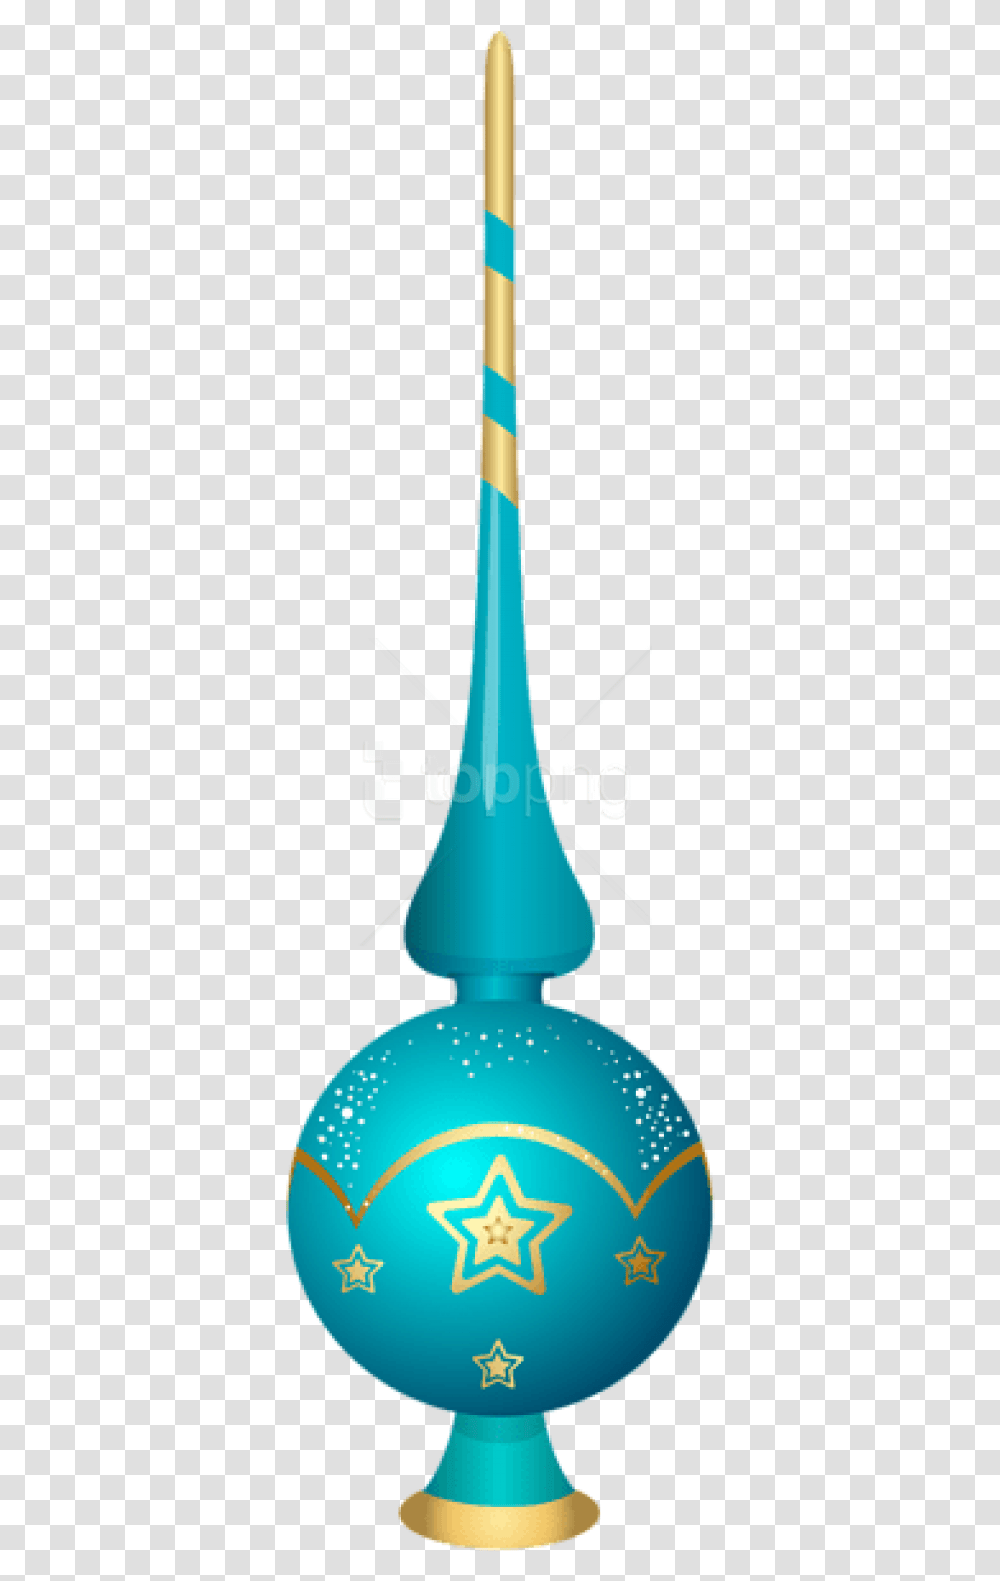 Free Blue Christmas Tree Top Ornament Christmas Tree Top, Lamp, Bottle, Ink Bottle Transparent Png